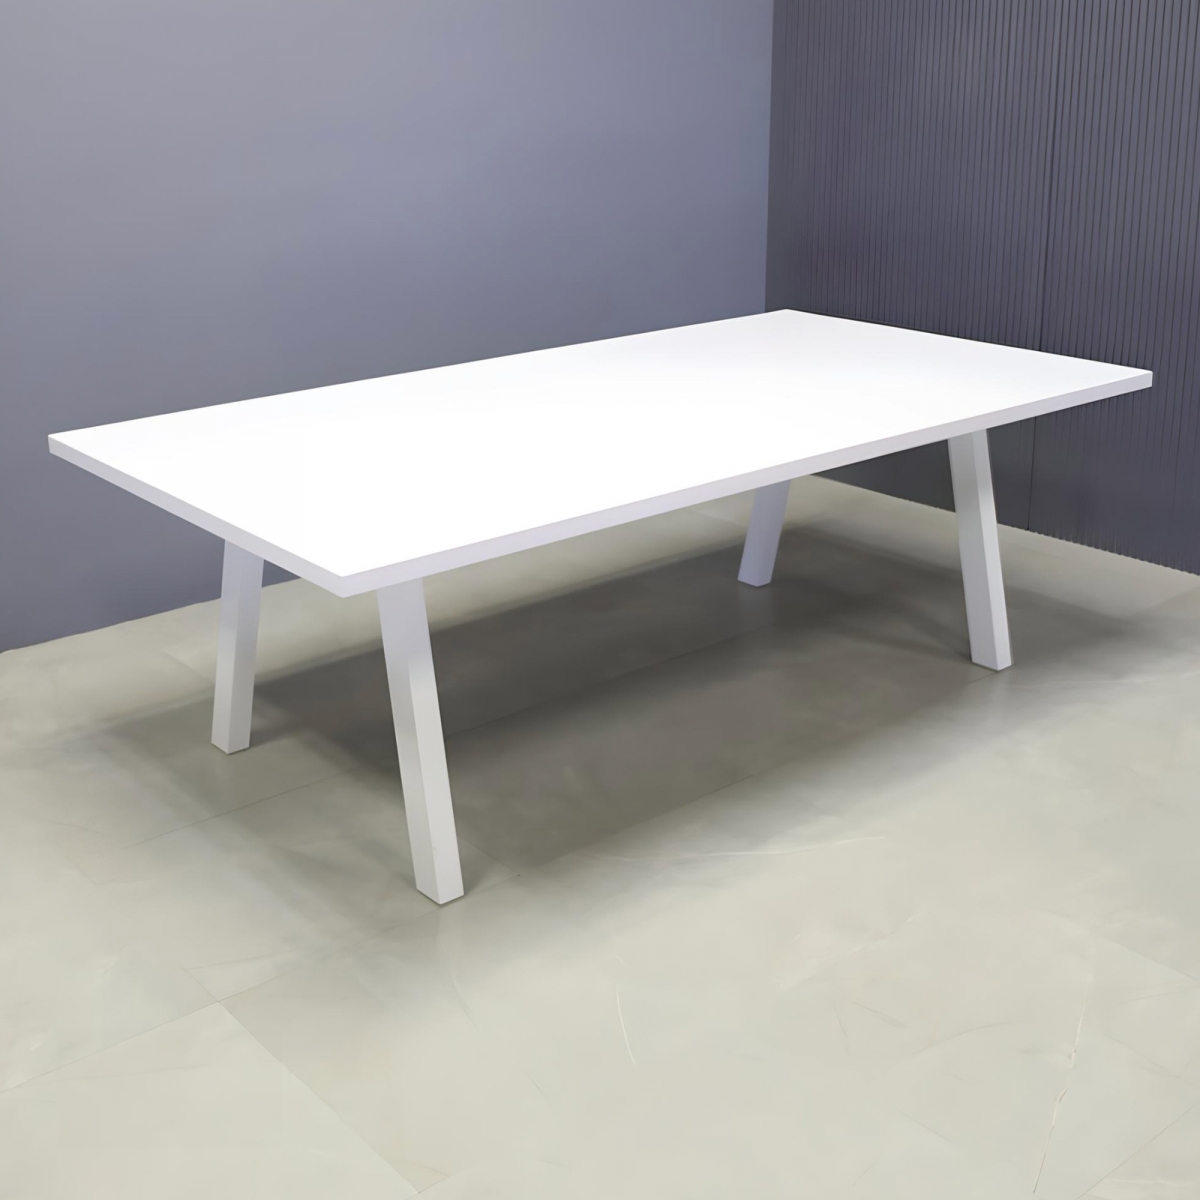 Newton Rectangular Conference Table in White Gloss Laminate - 84 In. - Stock #52